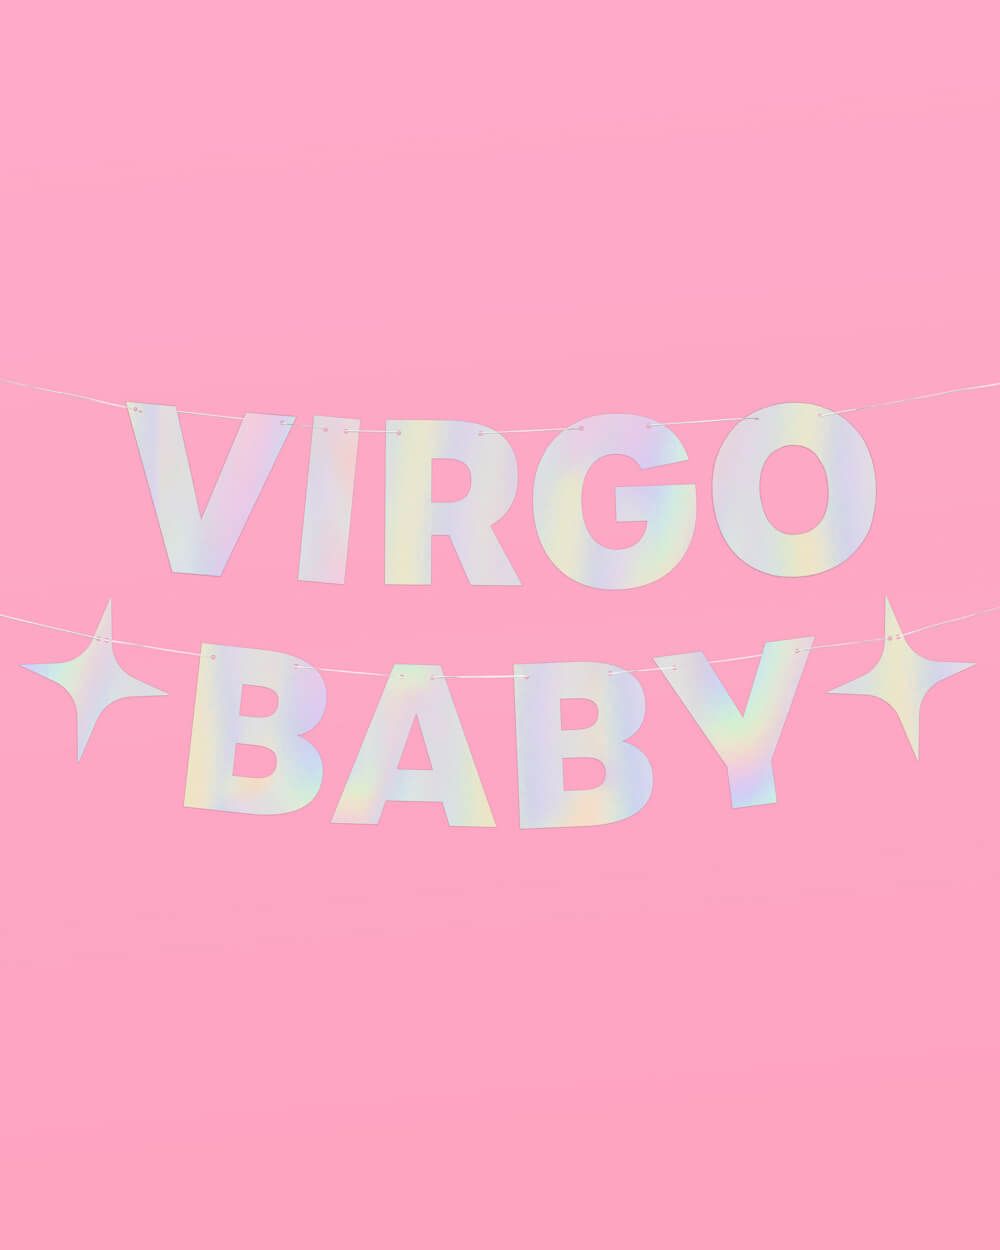 A Virgo Baby banner in holographic foil letters. - Virgo